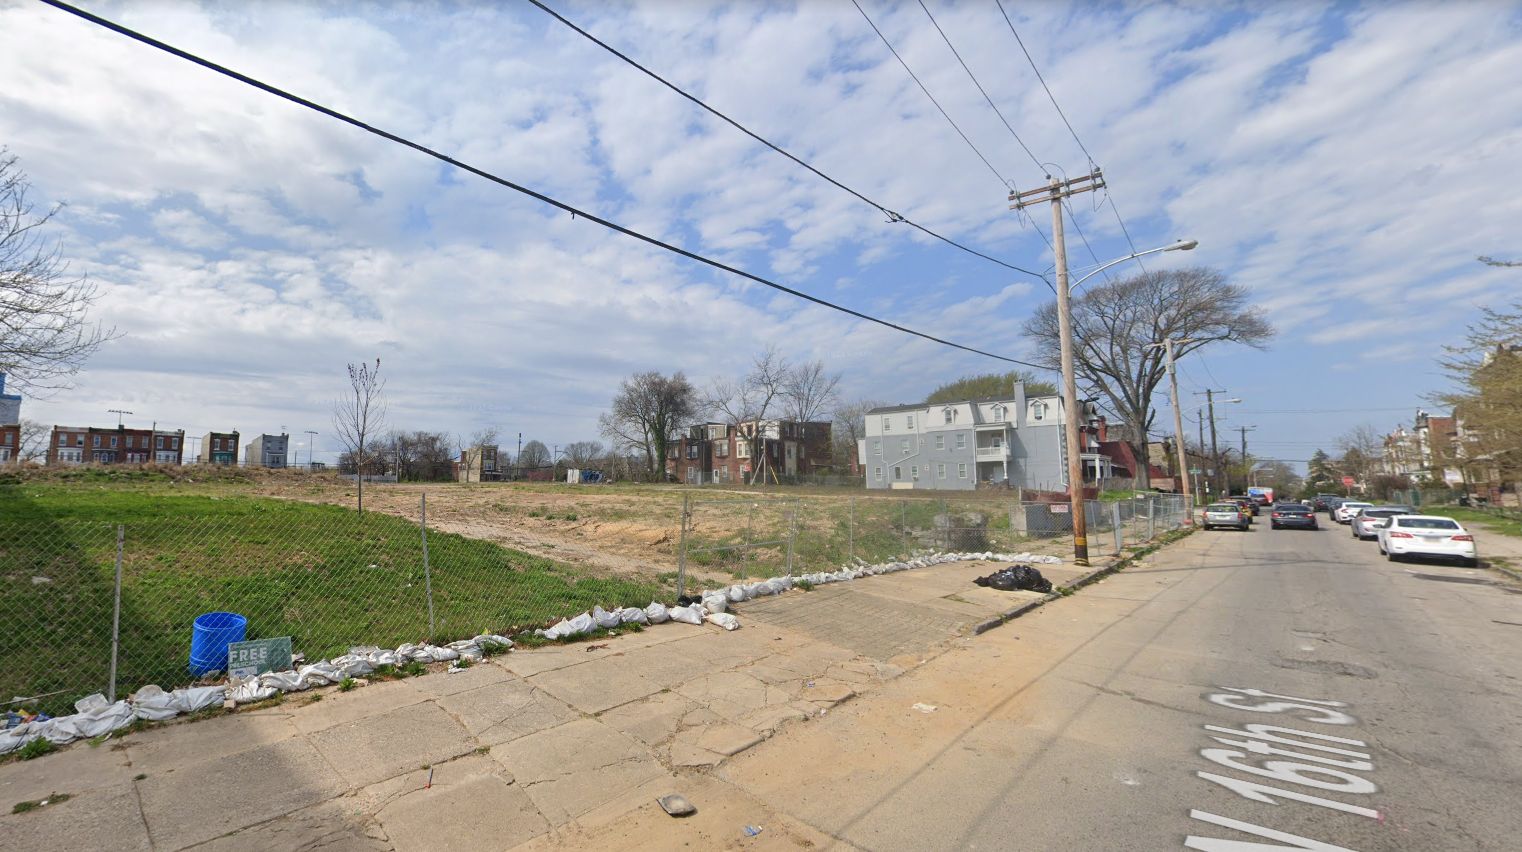 3216 North 16th Street prior to redevelopment. Looking northwest. April 2023. Credit: Google Maps